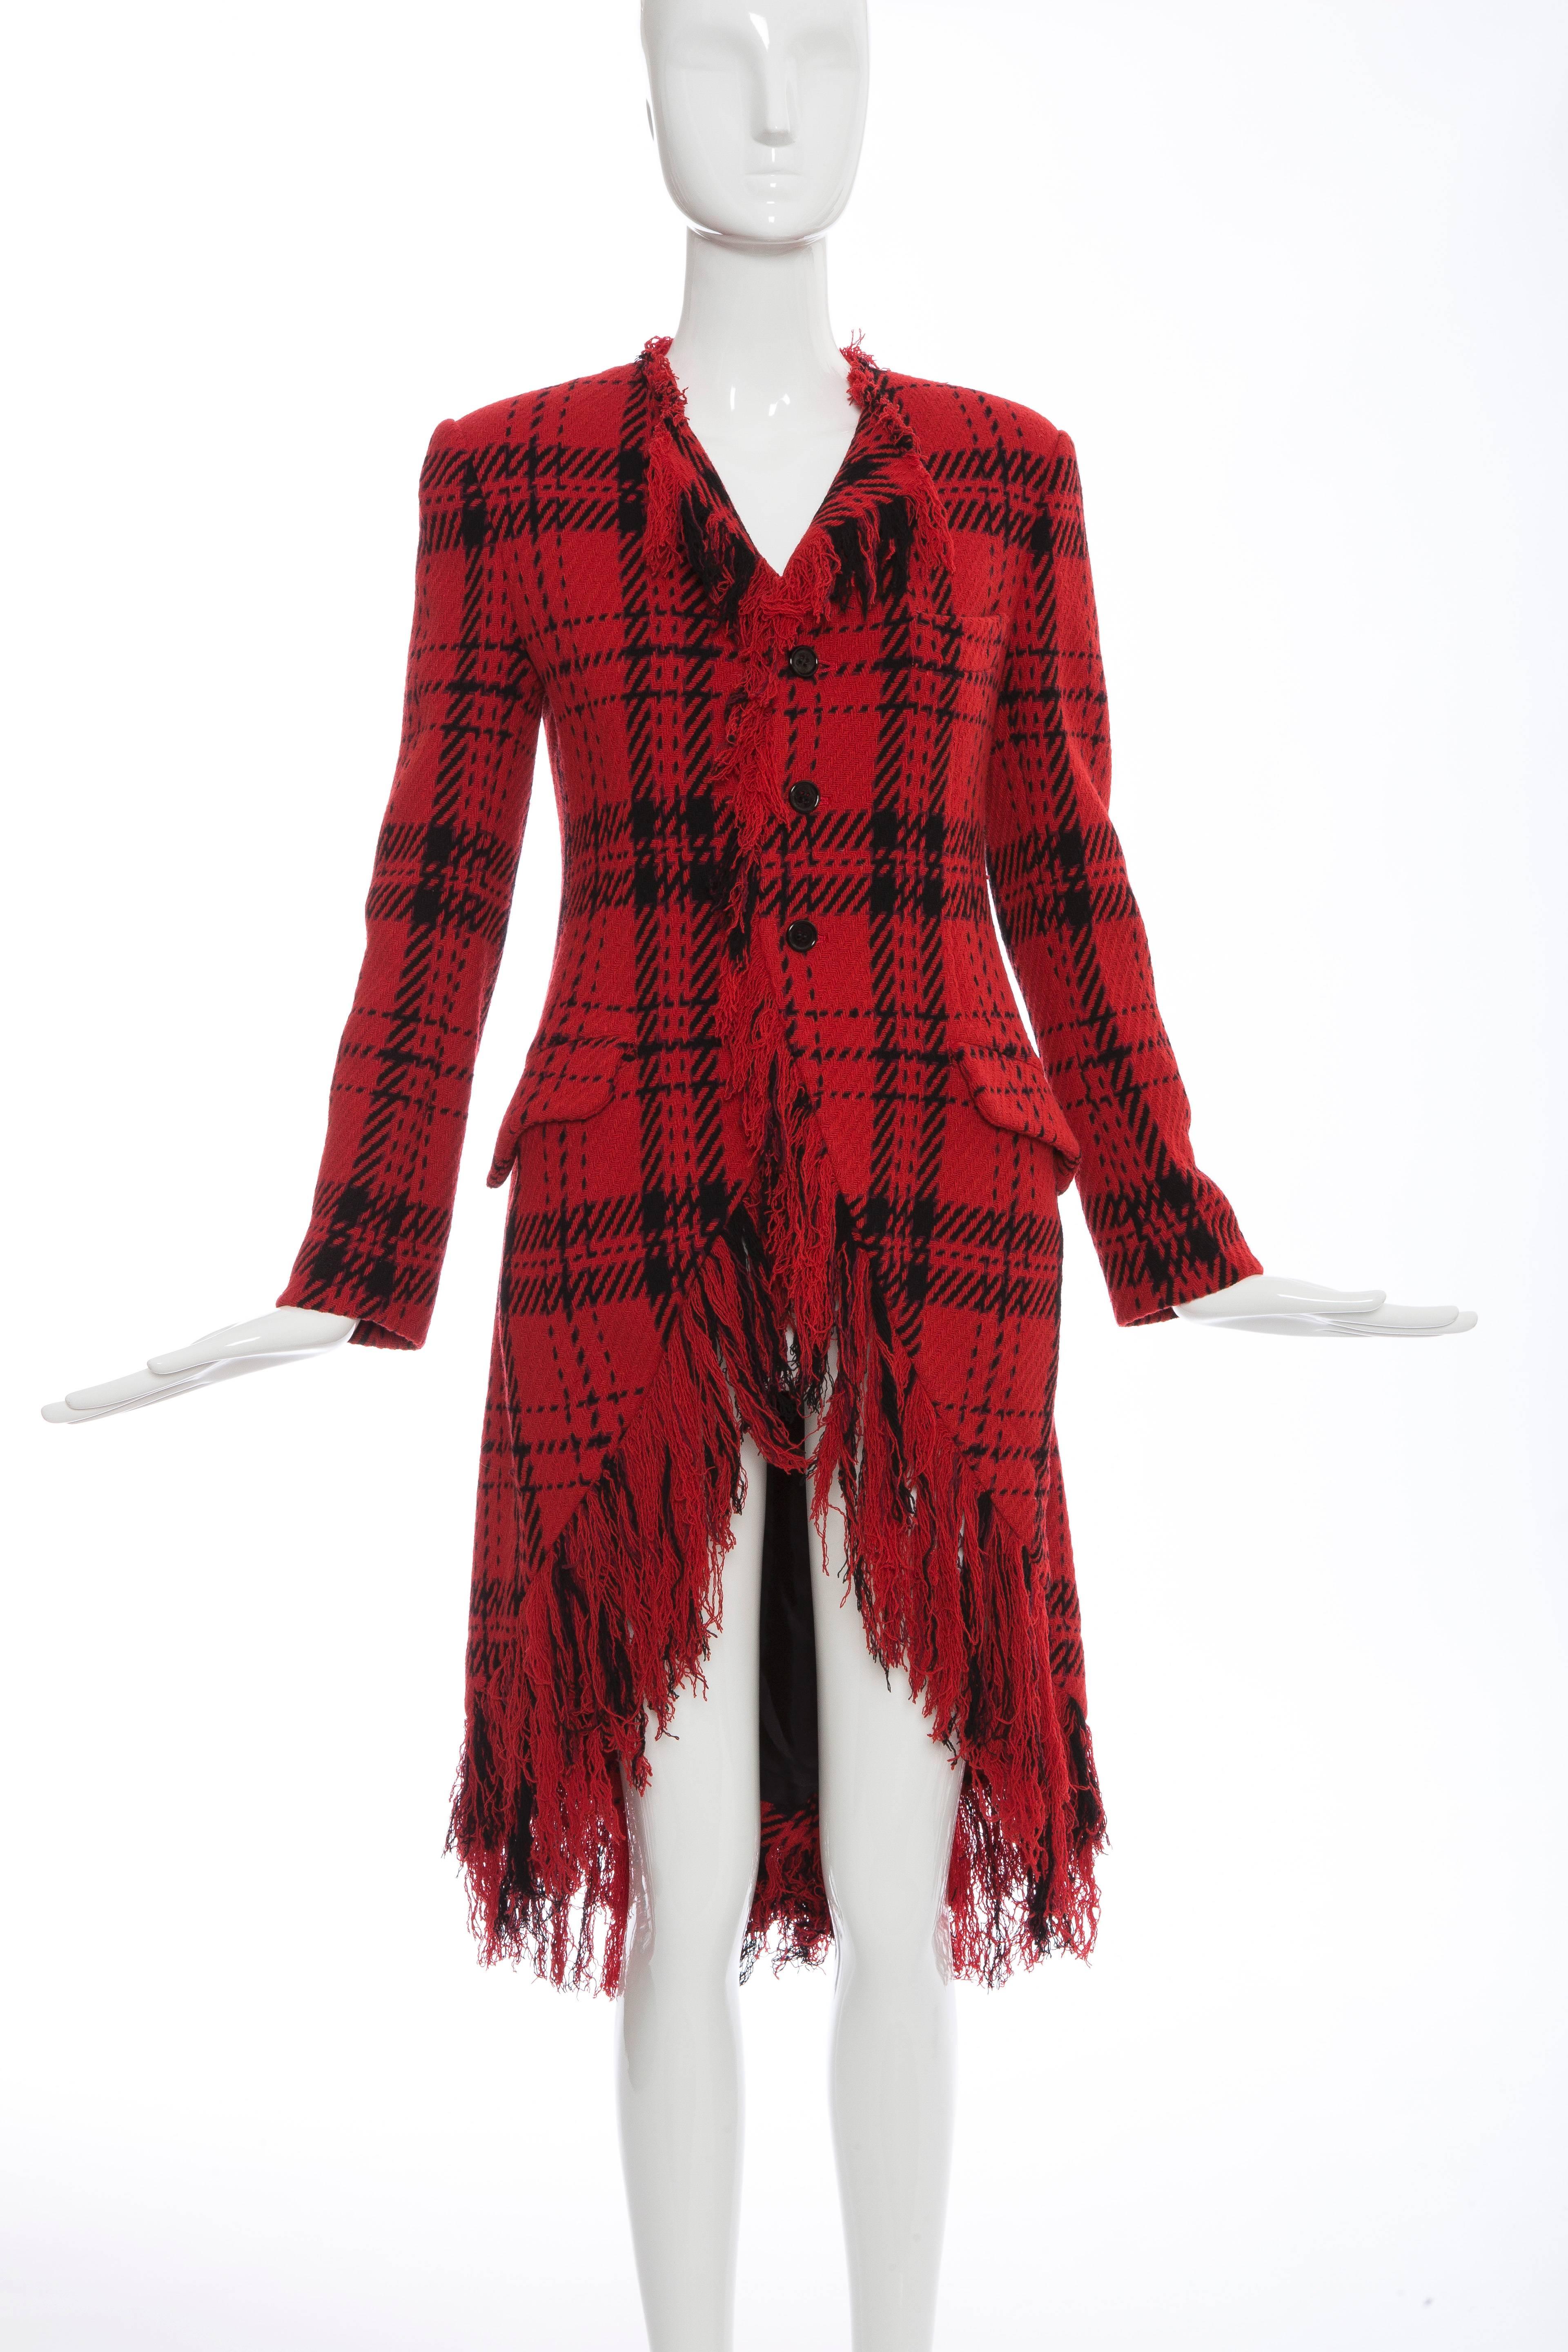 Yohji Yamamoto, Autumn/Winter 2003, red and black wool tartan fringed jacket with dual front flap pockets, front welt pocket, front button closures and fully lined.

The jacket was exhibited at the V&A "Yohji Yamamoto" exhibition